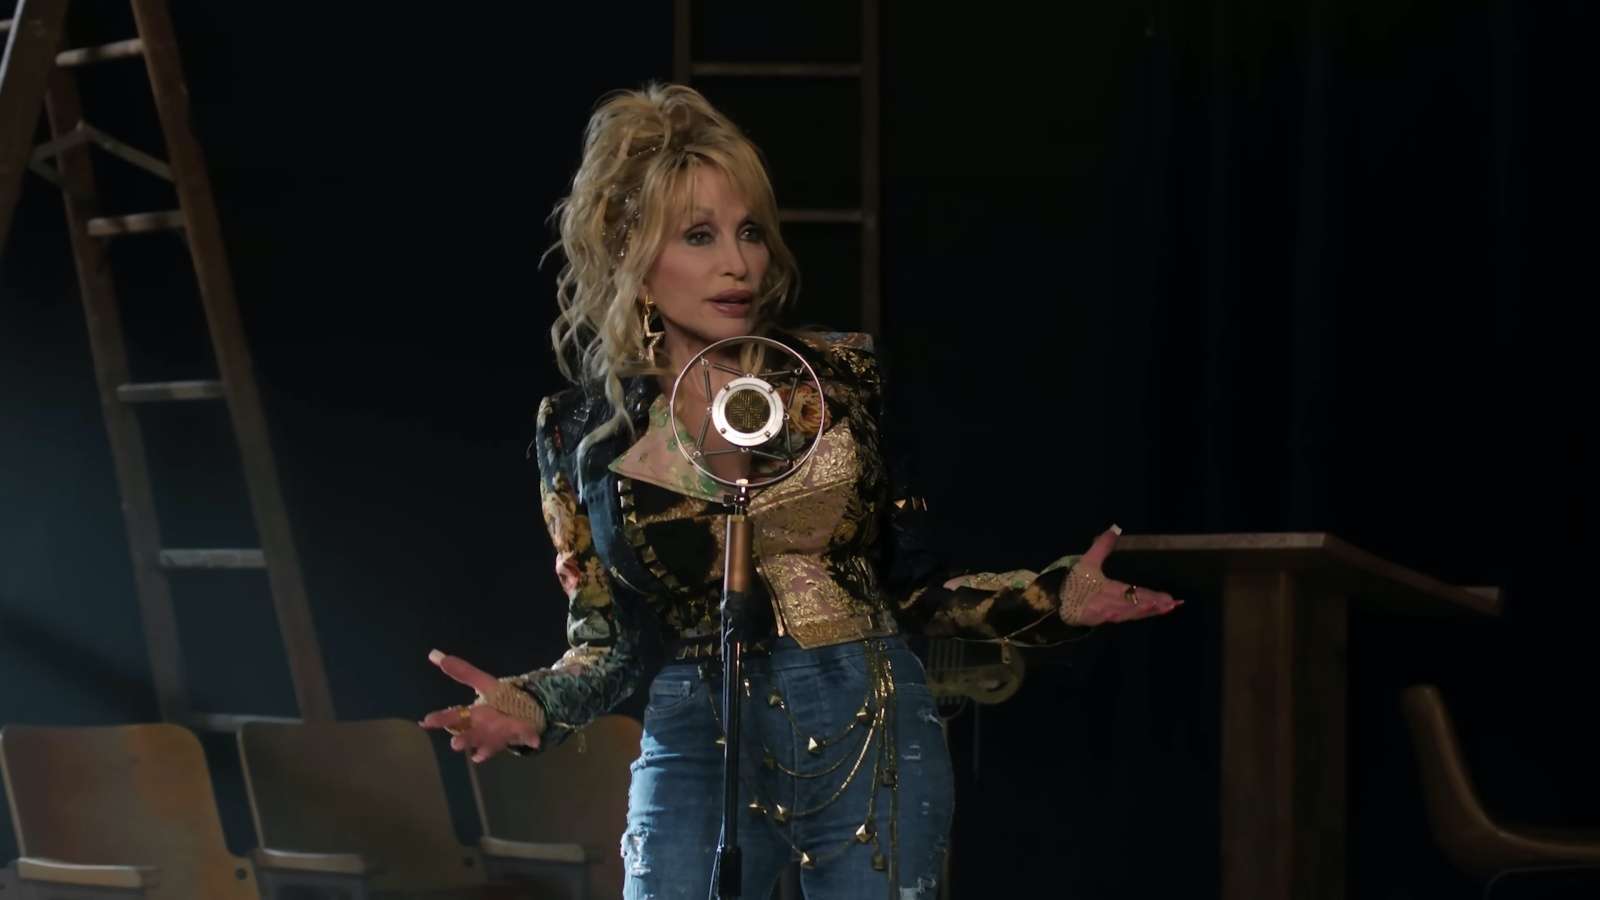 Doll Parton performing behind a microphone stand onstage